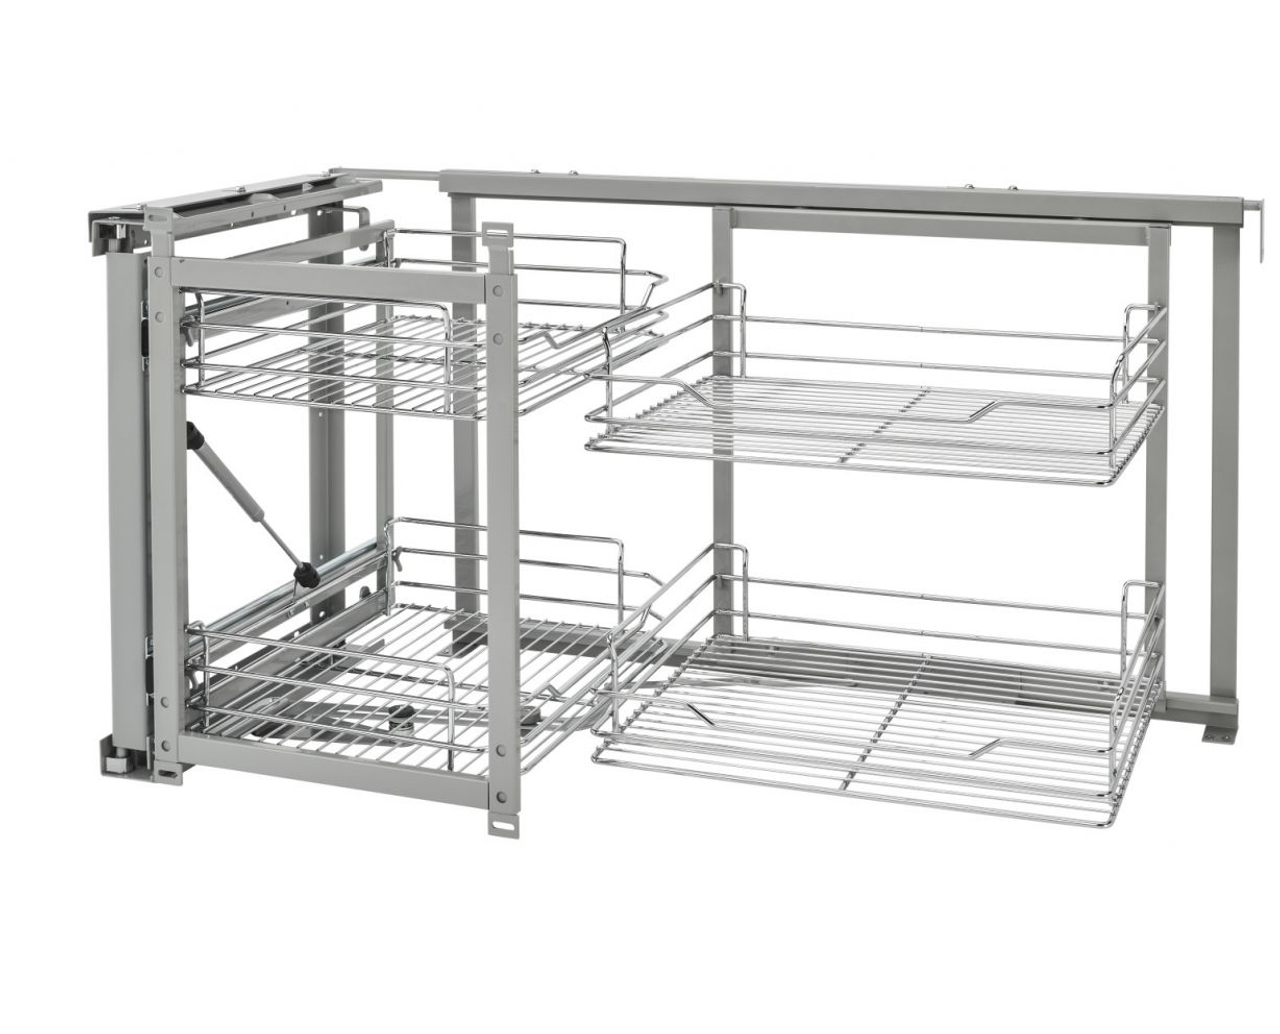 Rev-a-shelf Chrome Two-Tier Wire Bottom Shelves for Blind Corner Cabinet for 15" or 18" Opening 5707-15CR or 5707-18CR